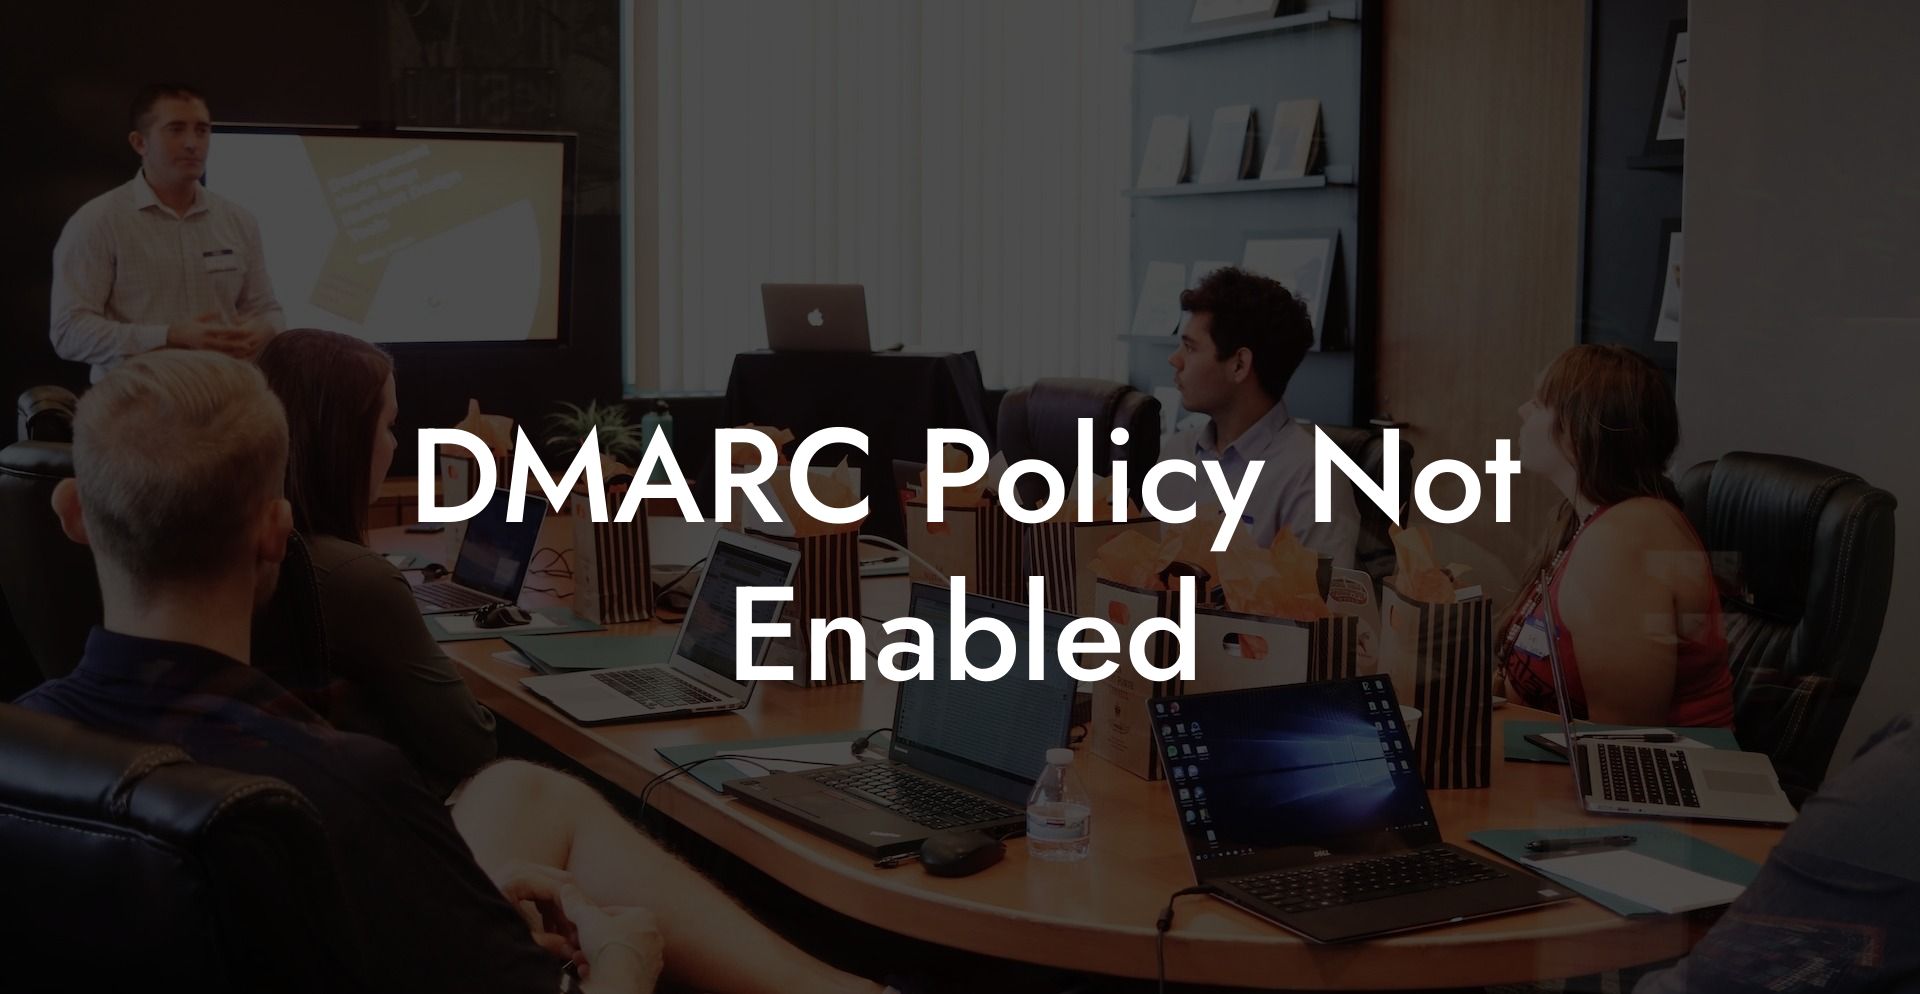 DMARC Policy Not Enabled